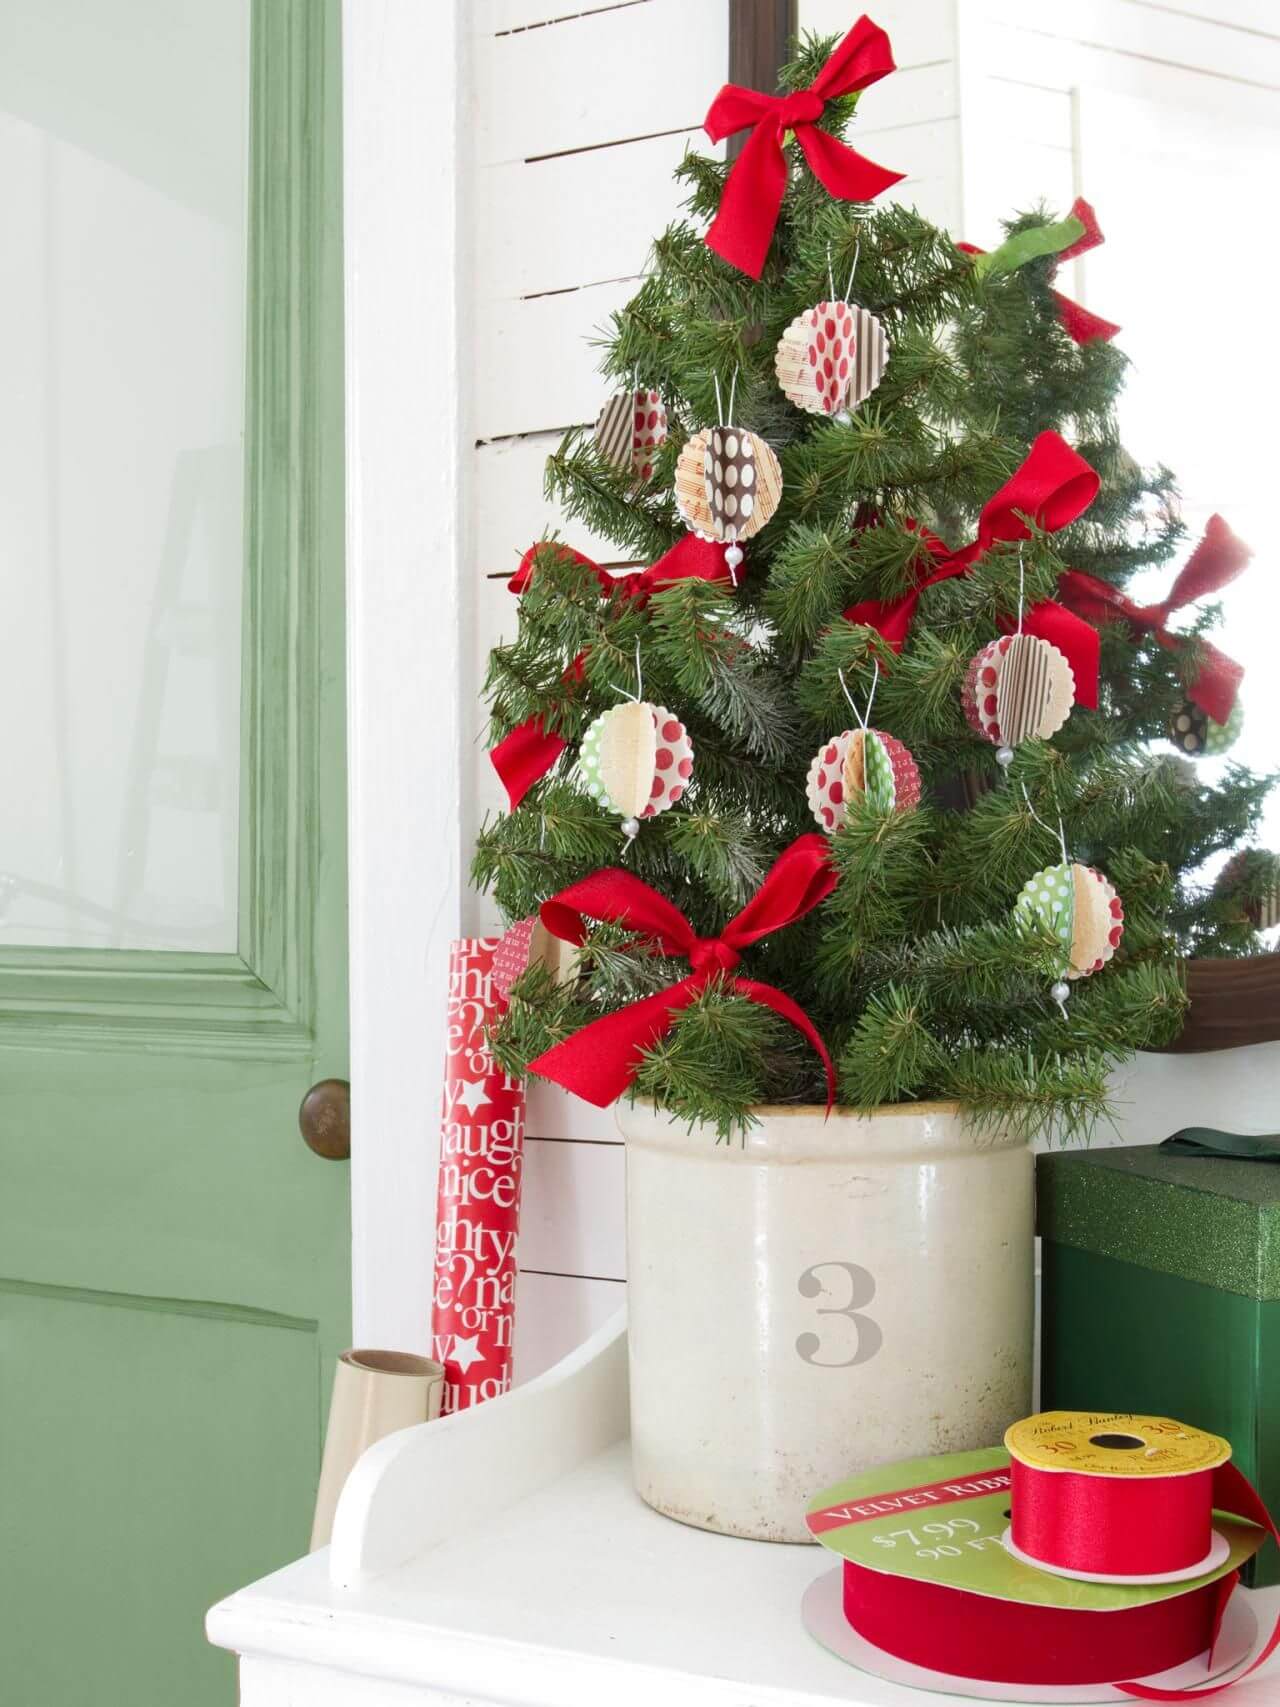 22 Best Outdoor Christmas Tree Decorations and Designs for ...